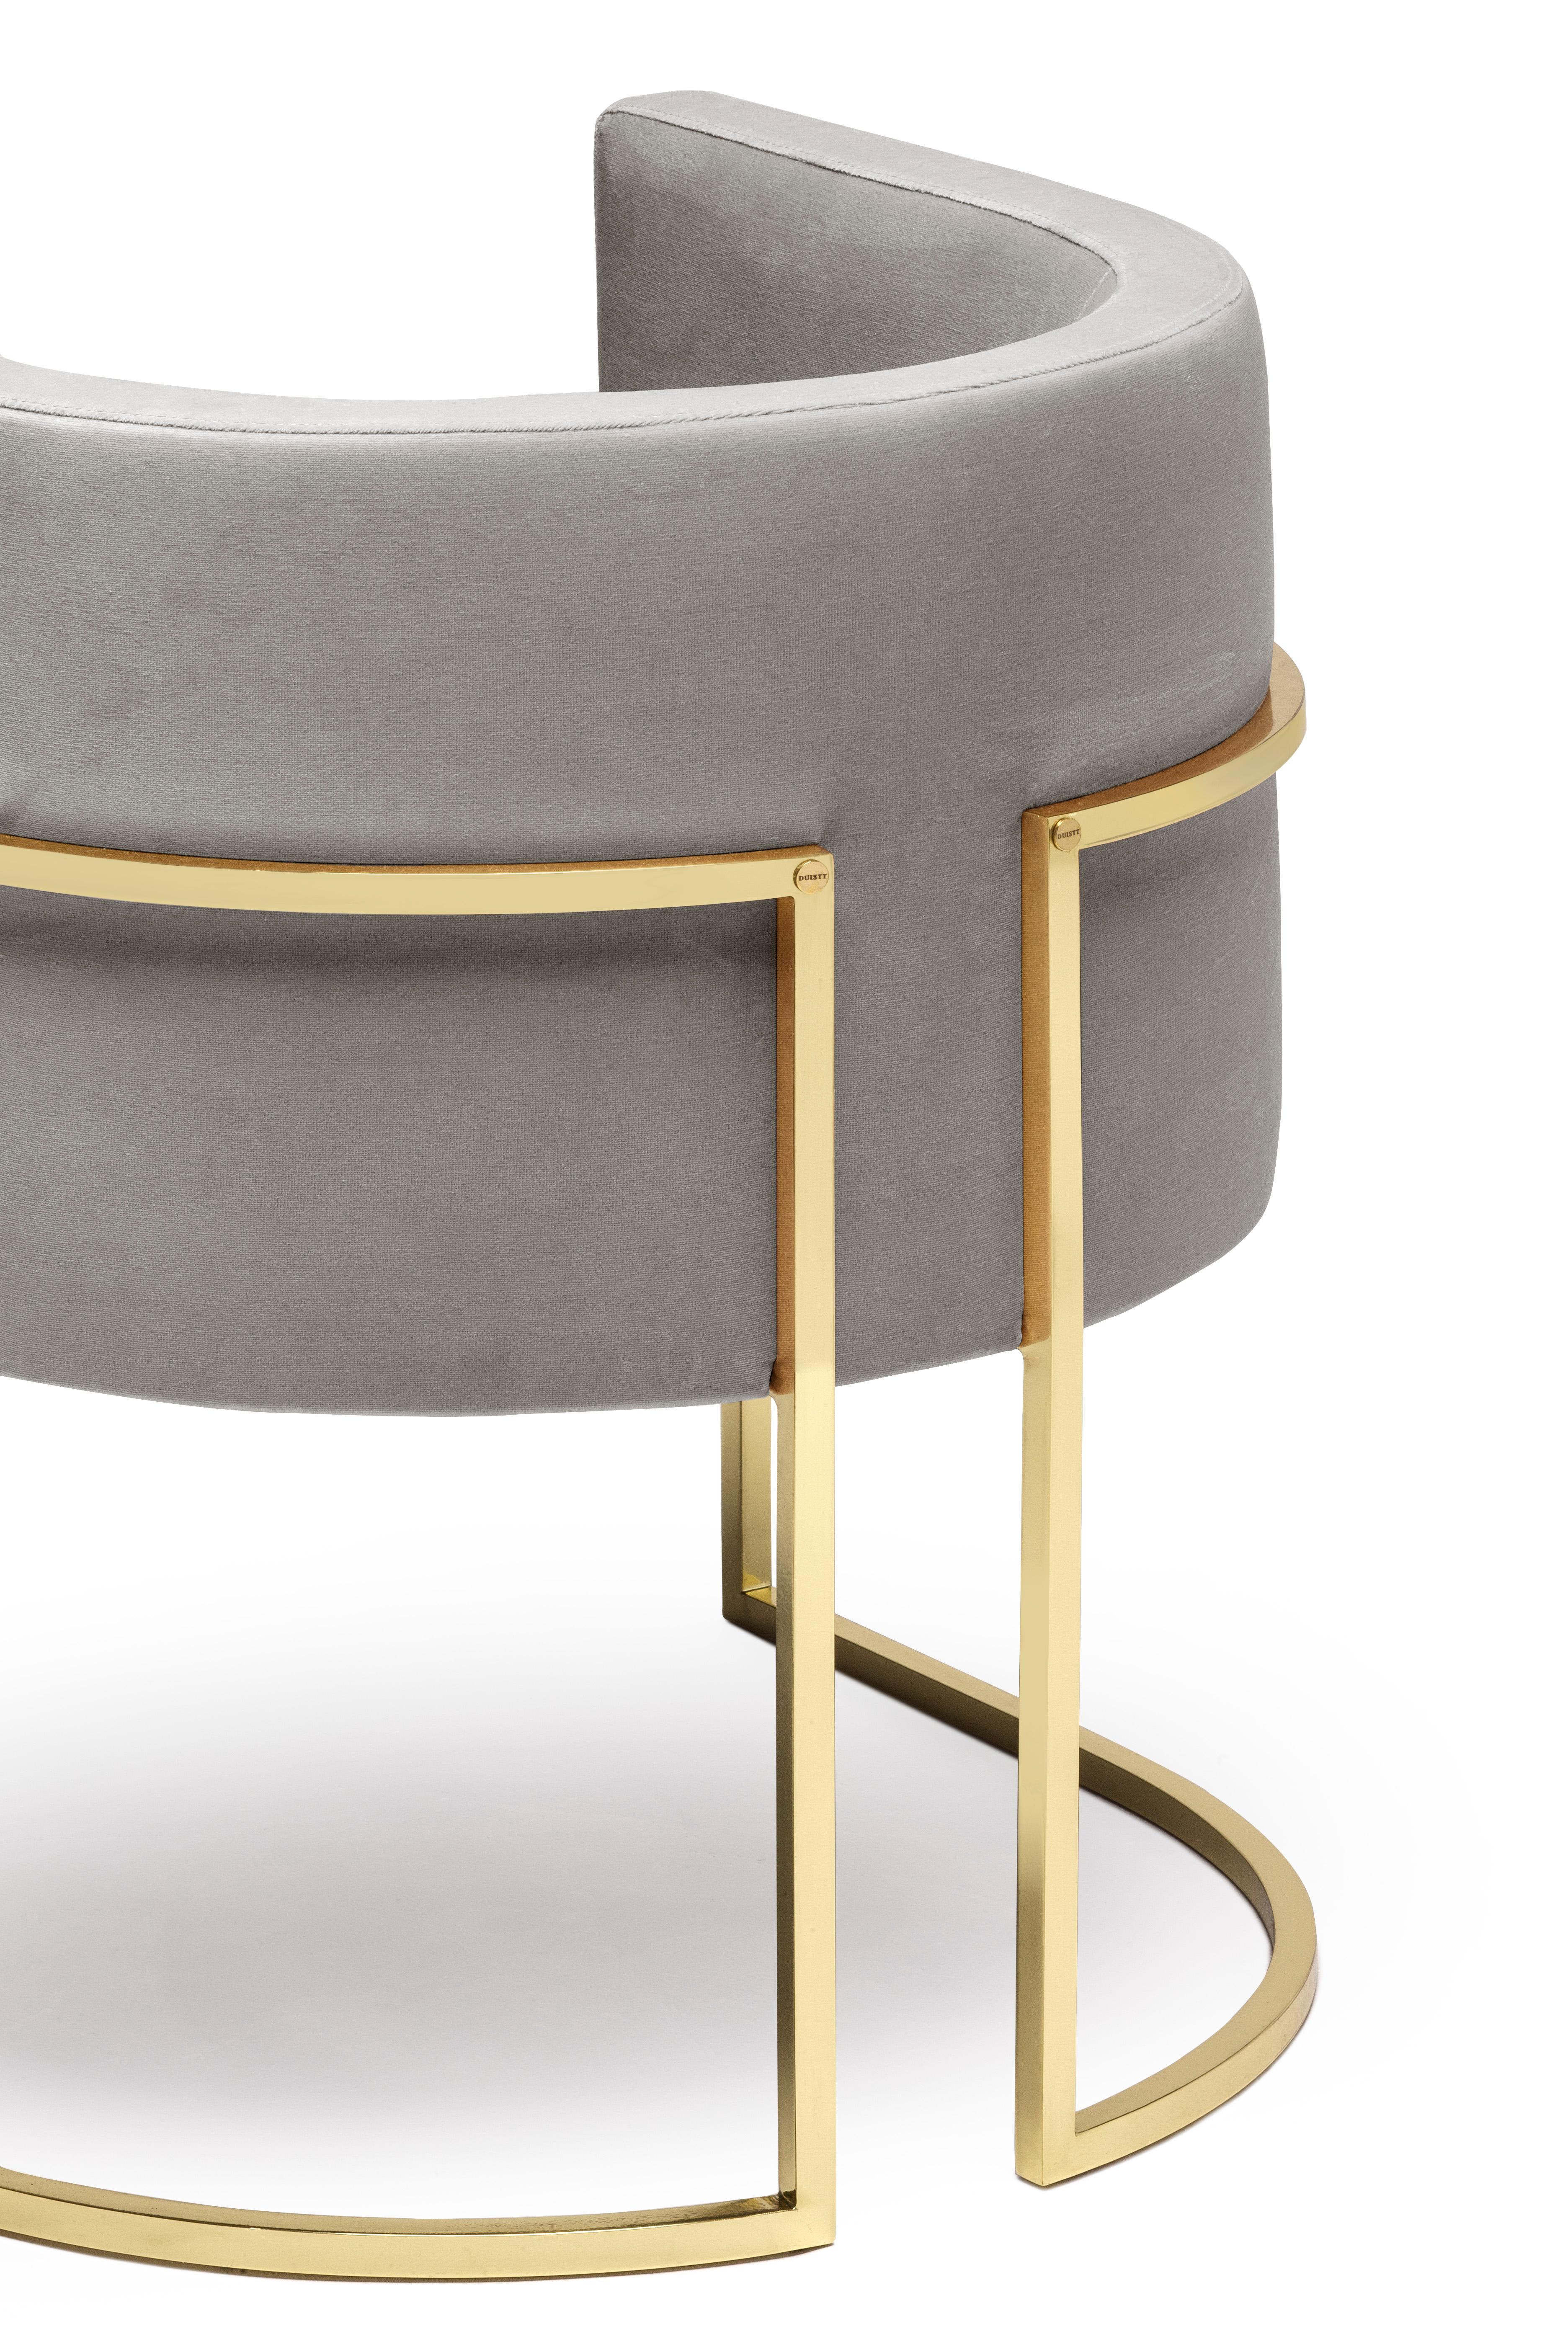 Julius Chair, in Polished Brass, Handcrafted in Portugal by Duistt.

The JULIUS chair is a timeless and understated luxury piece, constructed with noble materials such as polished brass and cotton velvet. Beyond the fact, that this is versatile